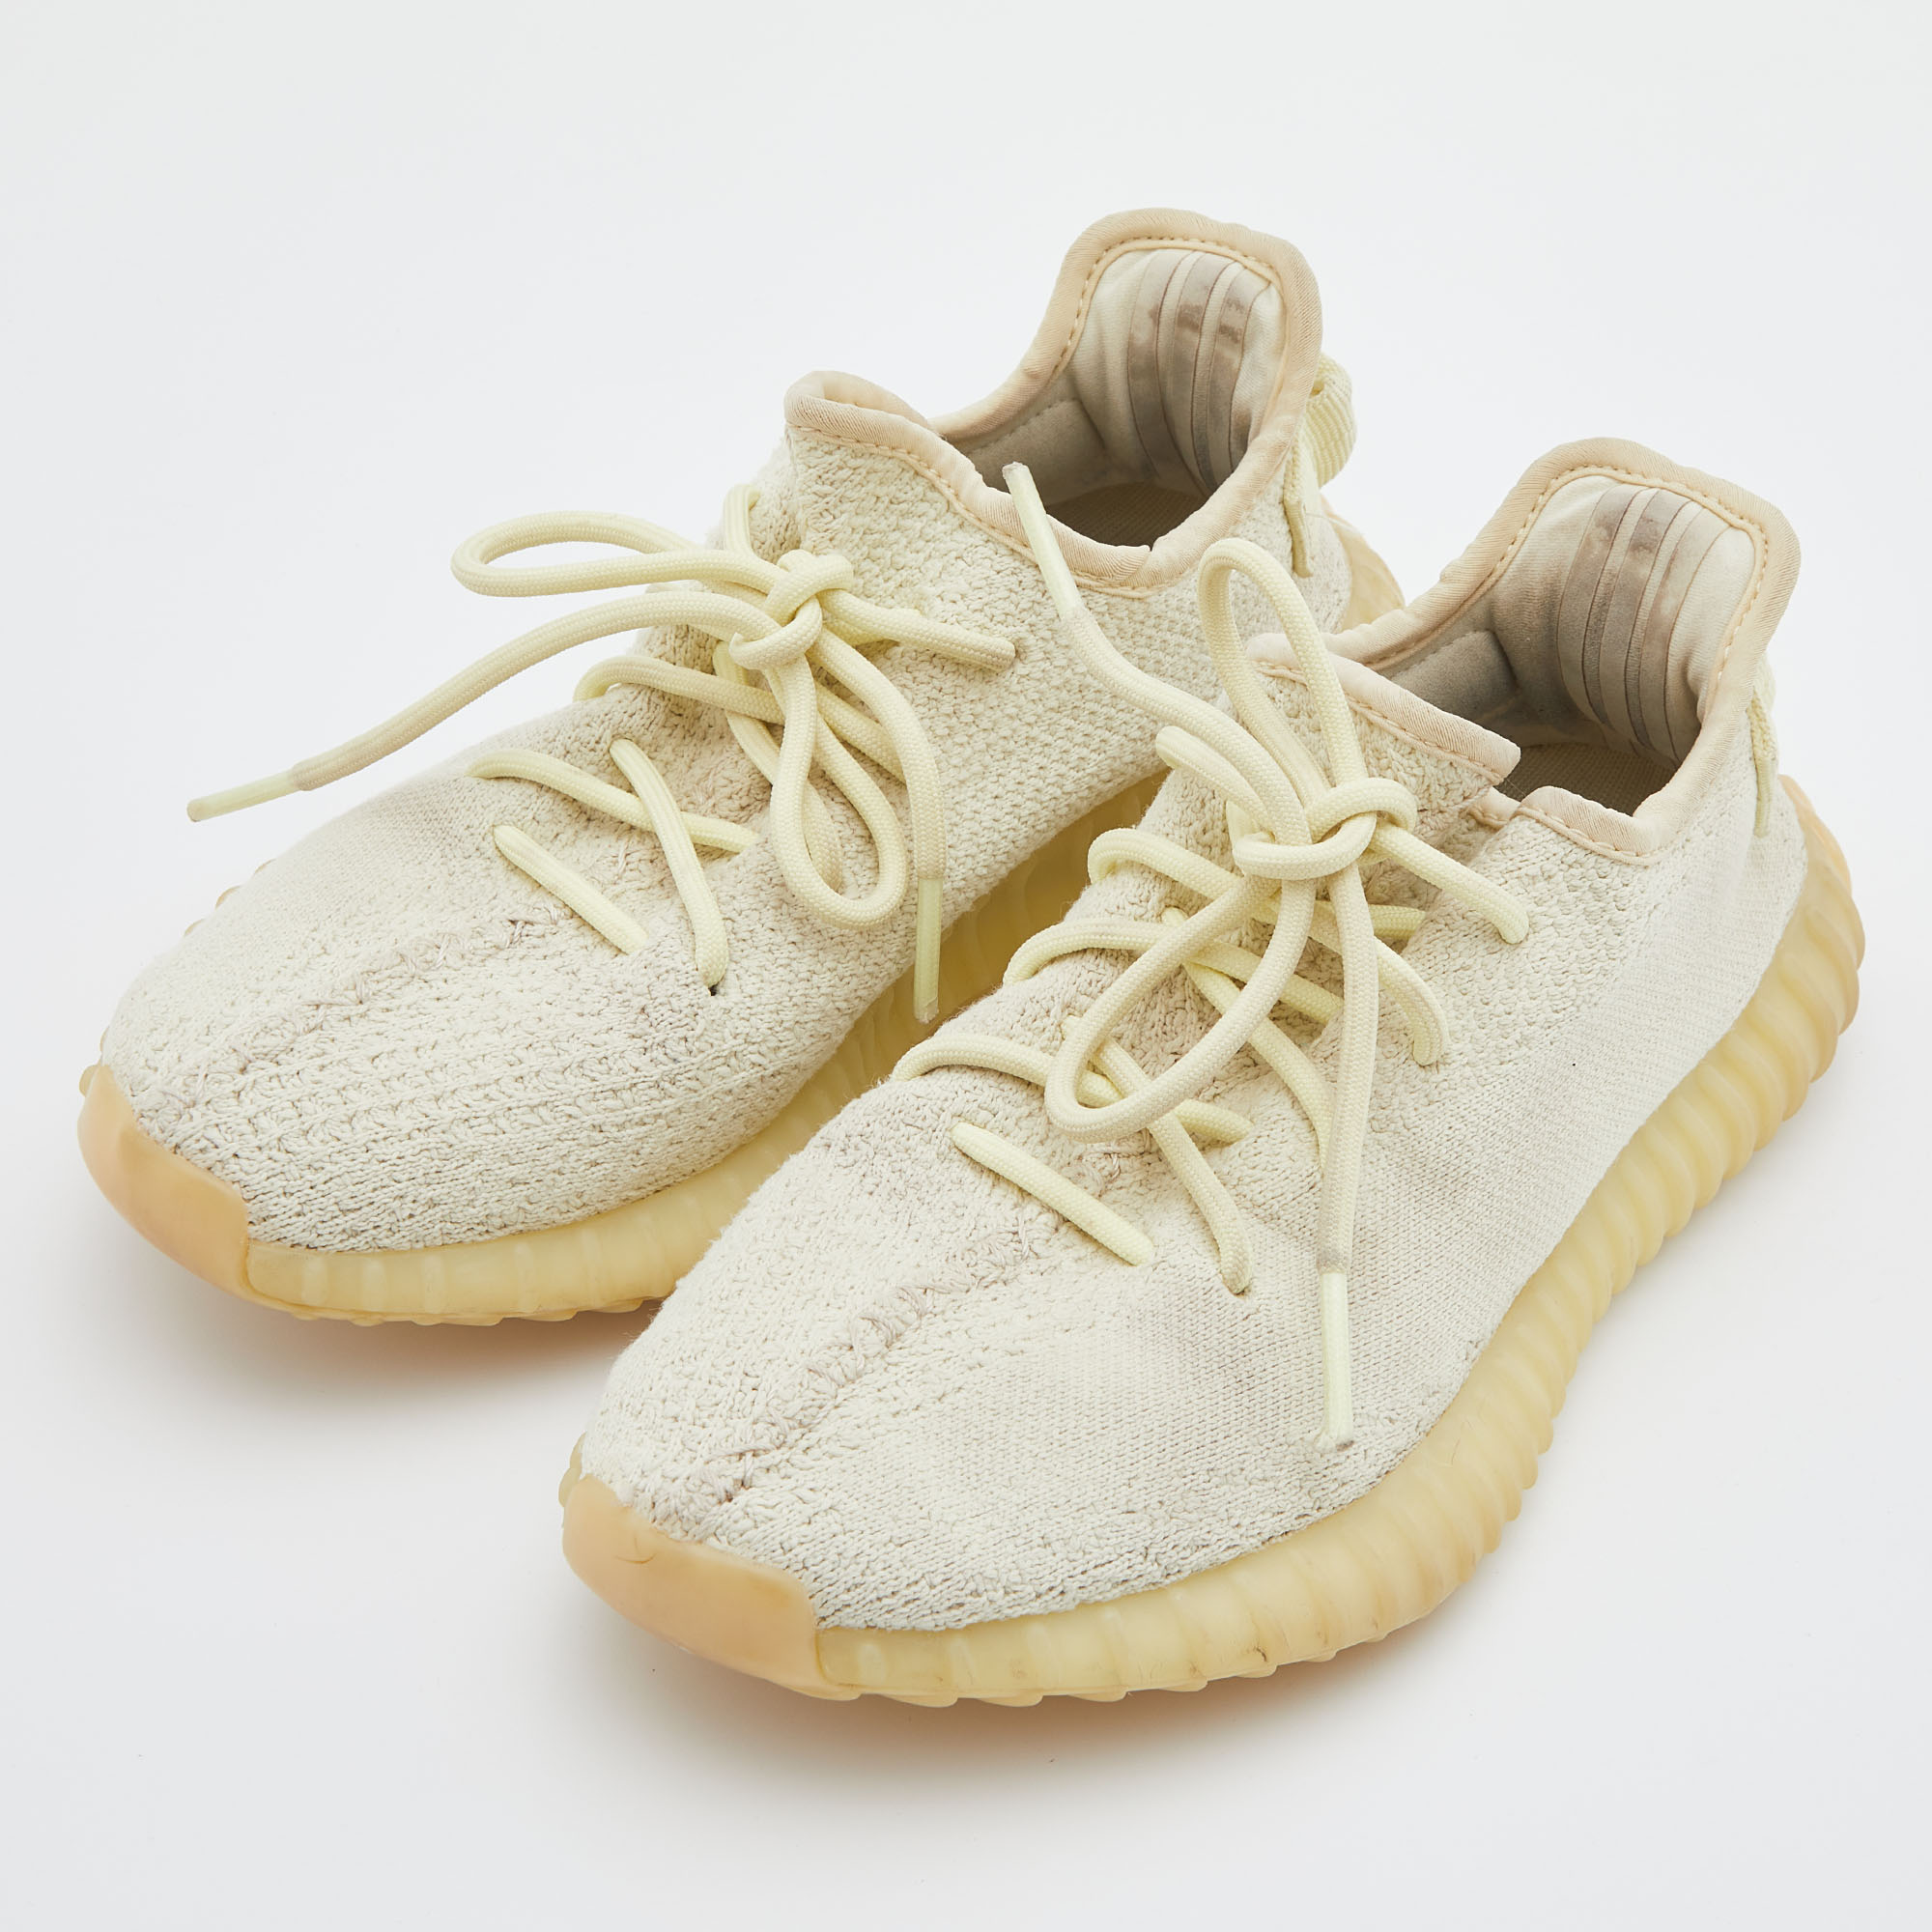 

Yeezy x Adidas Cream Knit Fabric Boost 350 V2 Butter Sneakers Size 38 2/3